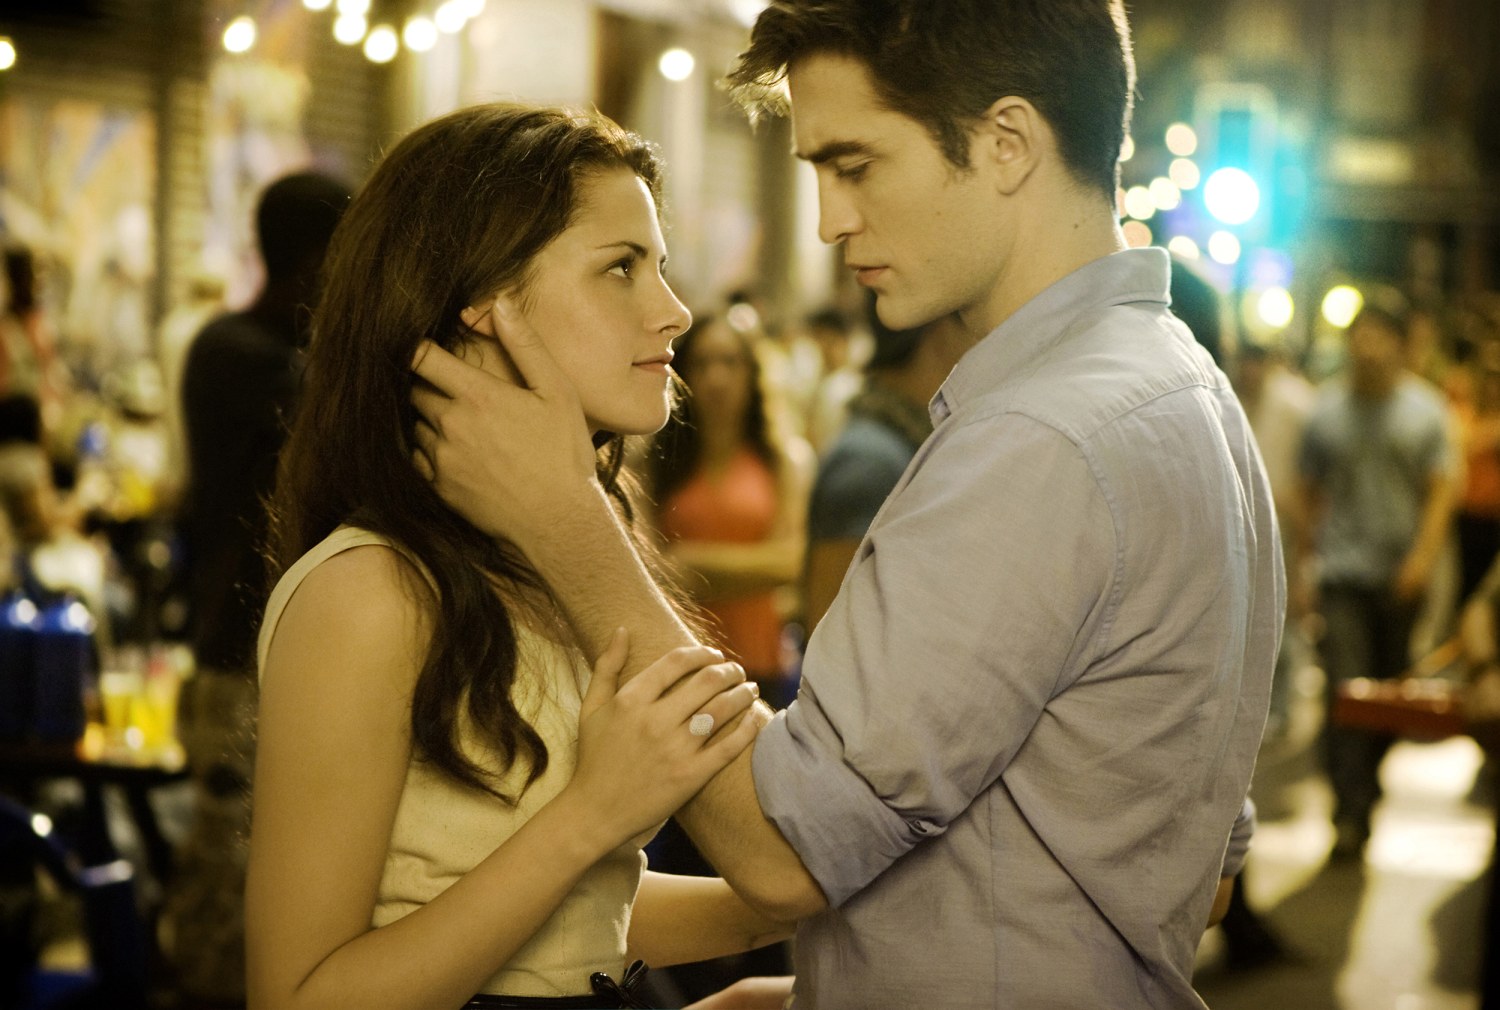 Midnight Sun a story about Edward Cullen's struggle to love a human